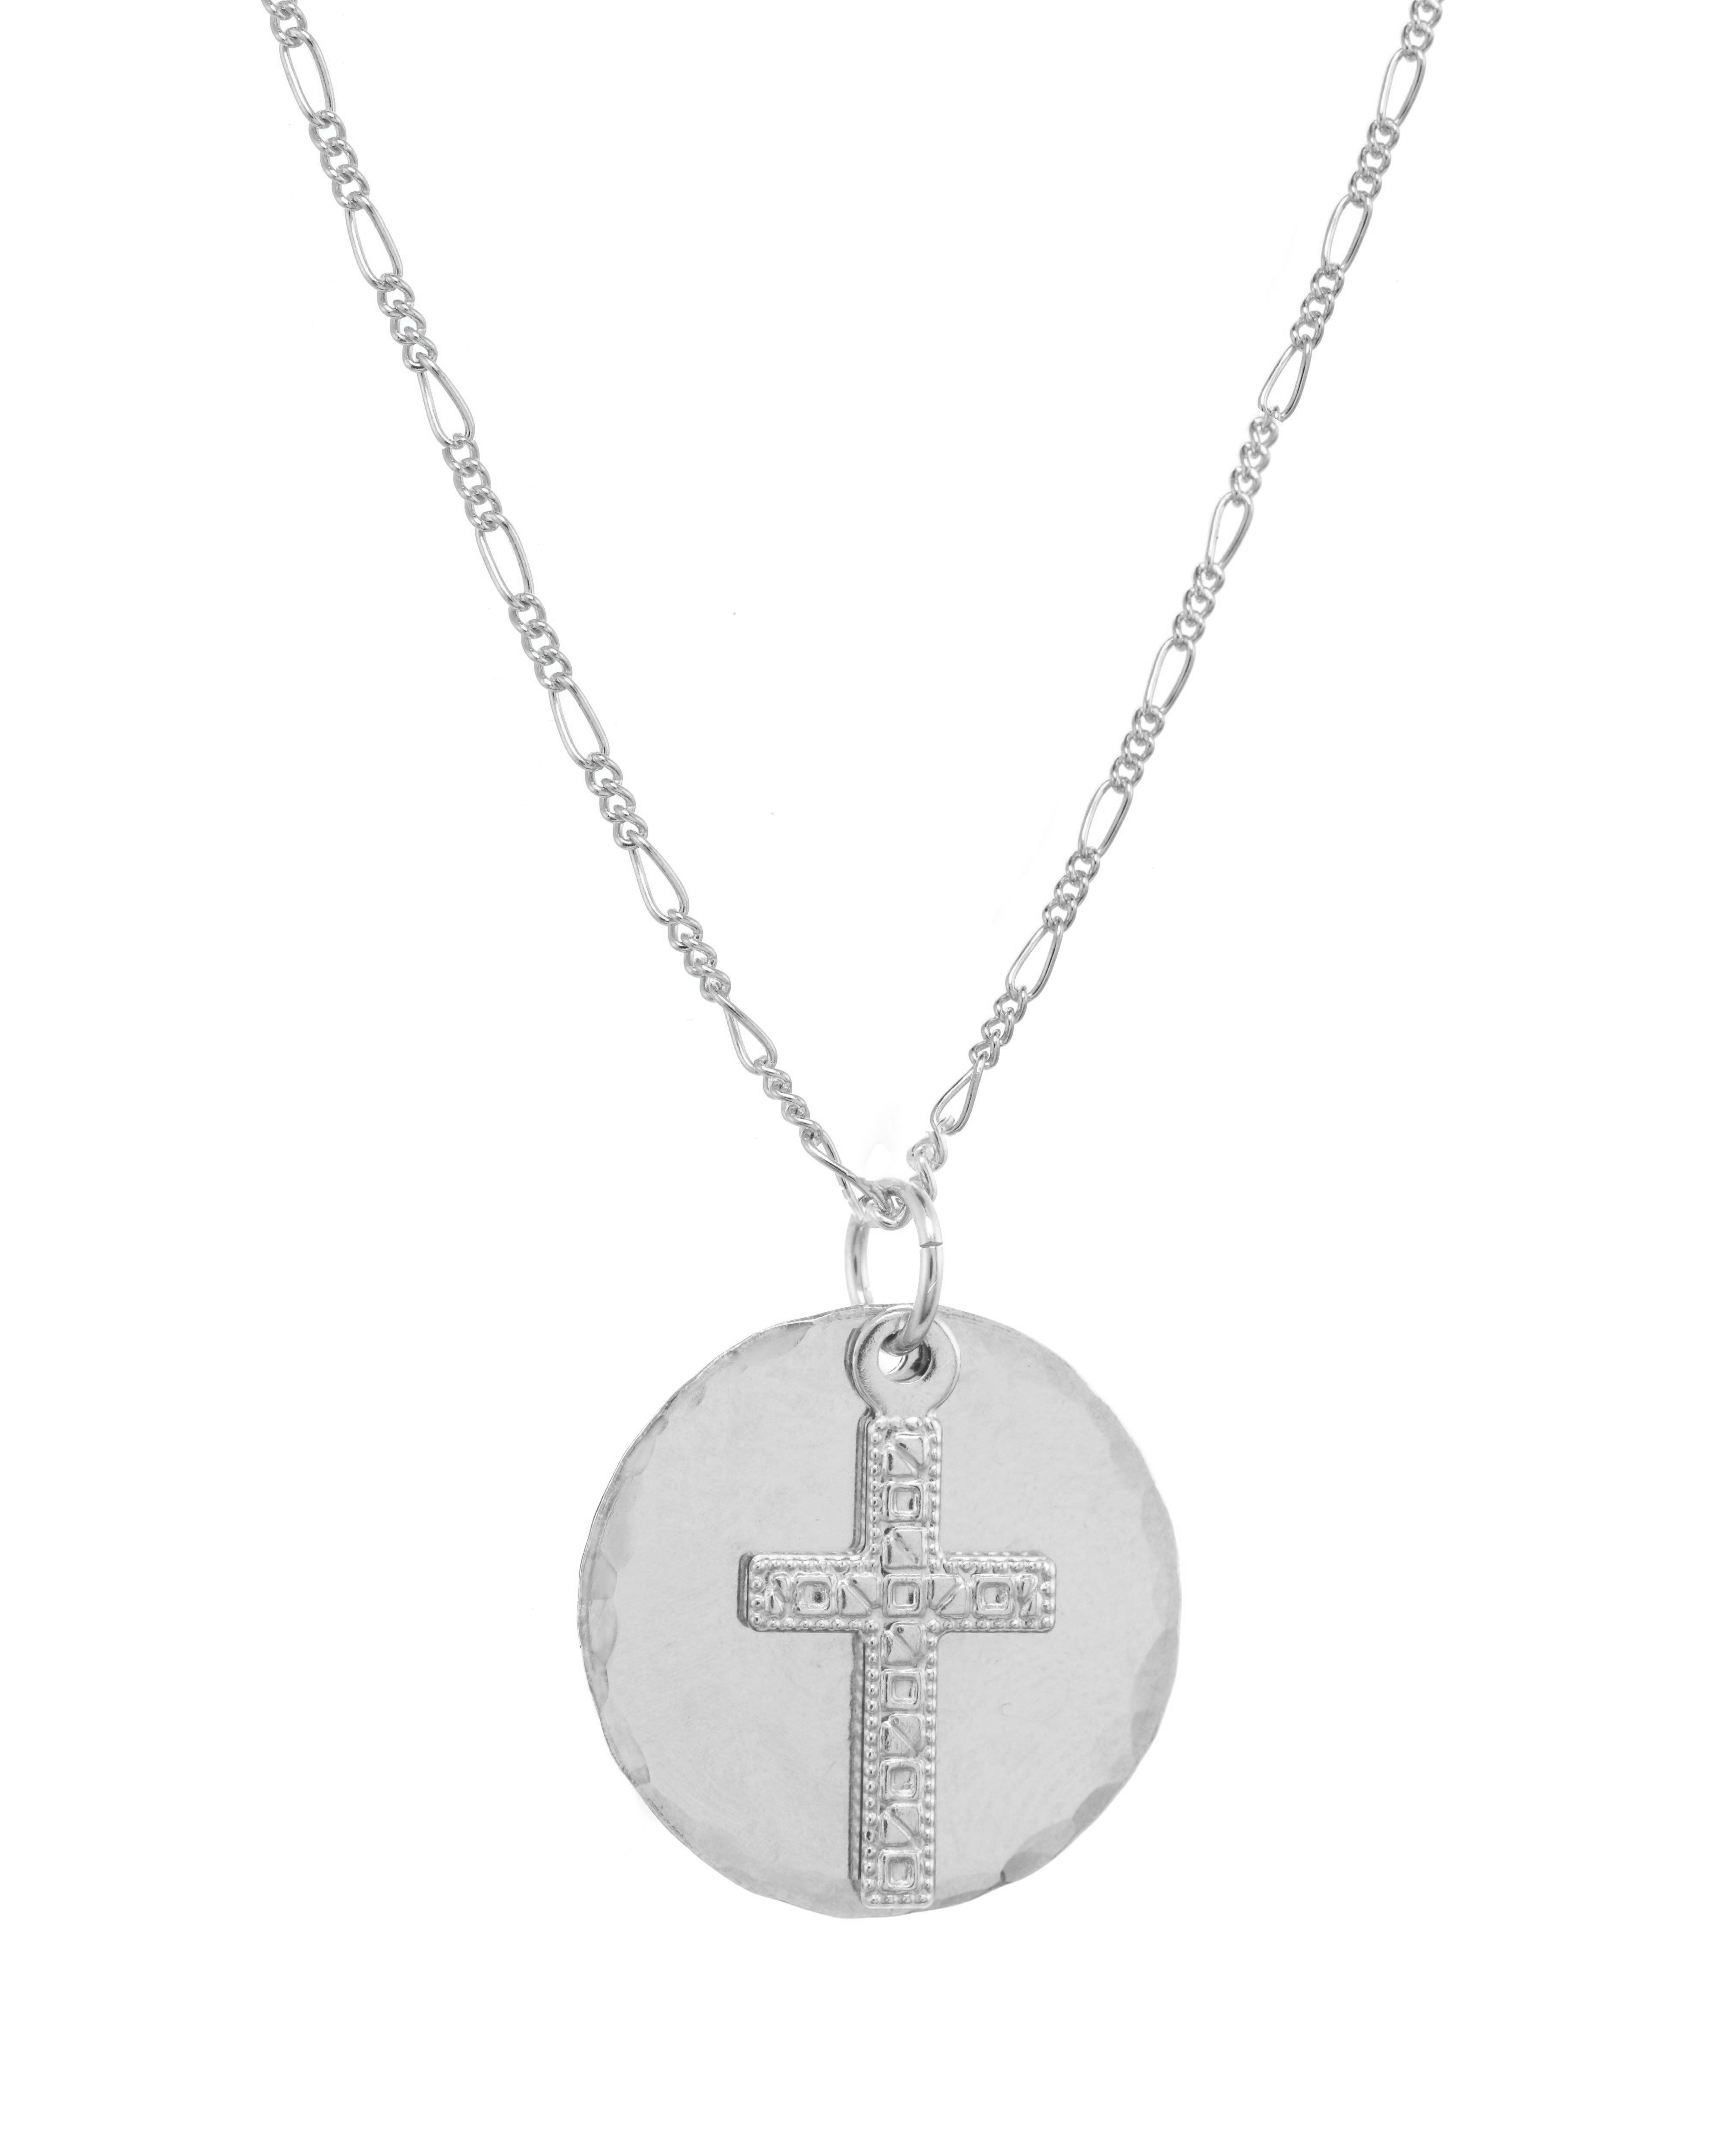 Orbis Necklace by KOZAKH. A 16 to 18 inch adjustable length Figaro chain necklace, crafted in Sterling Silver, featuring a 16mm Hammered on the sides coin and a 5x10mm Filigree cross.